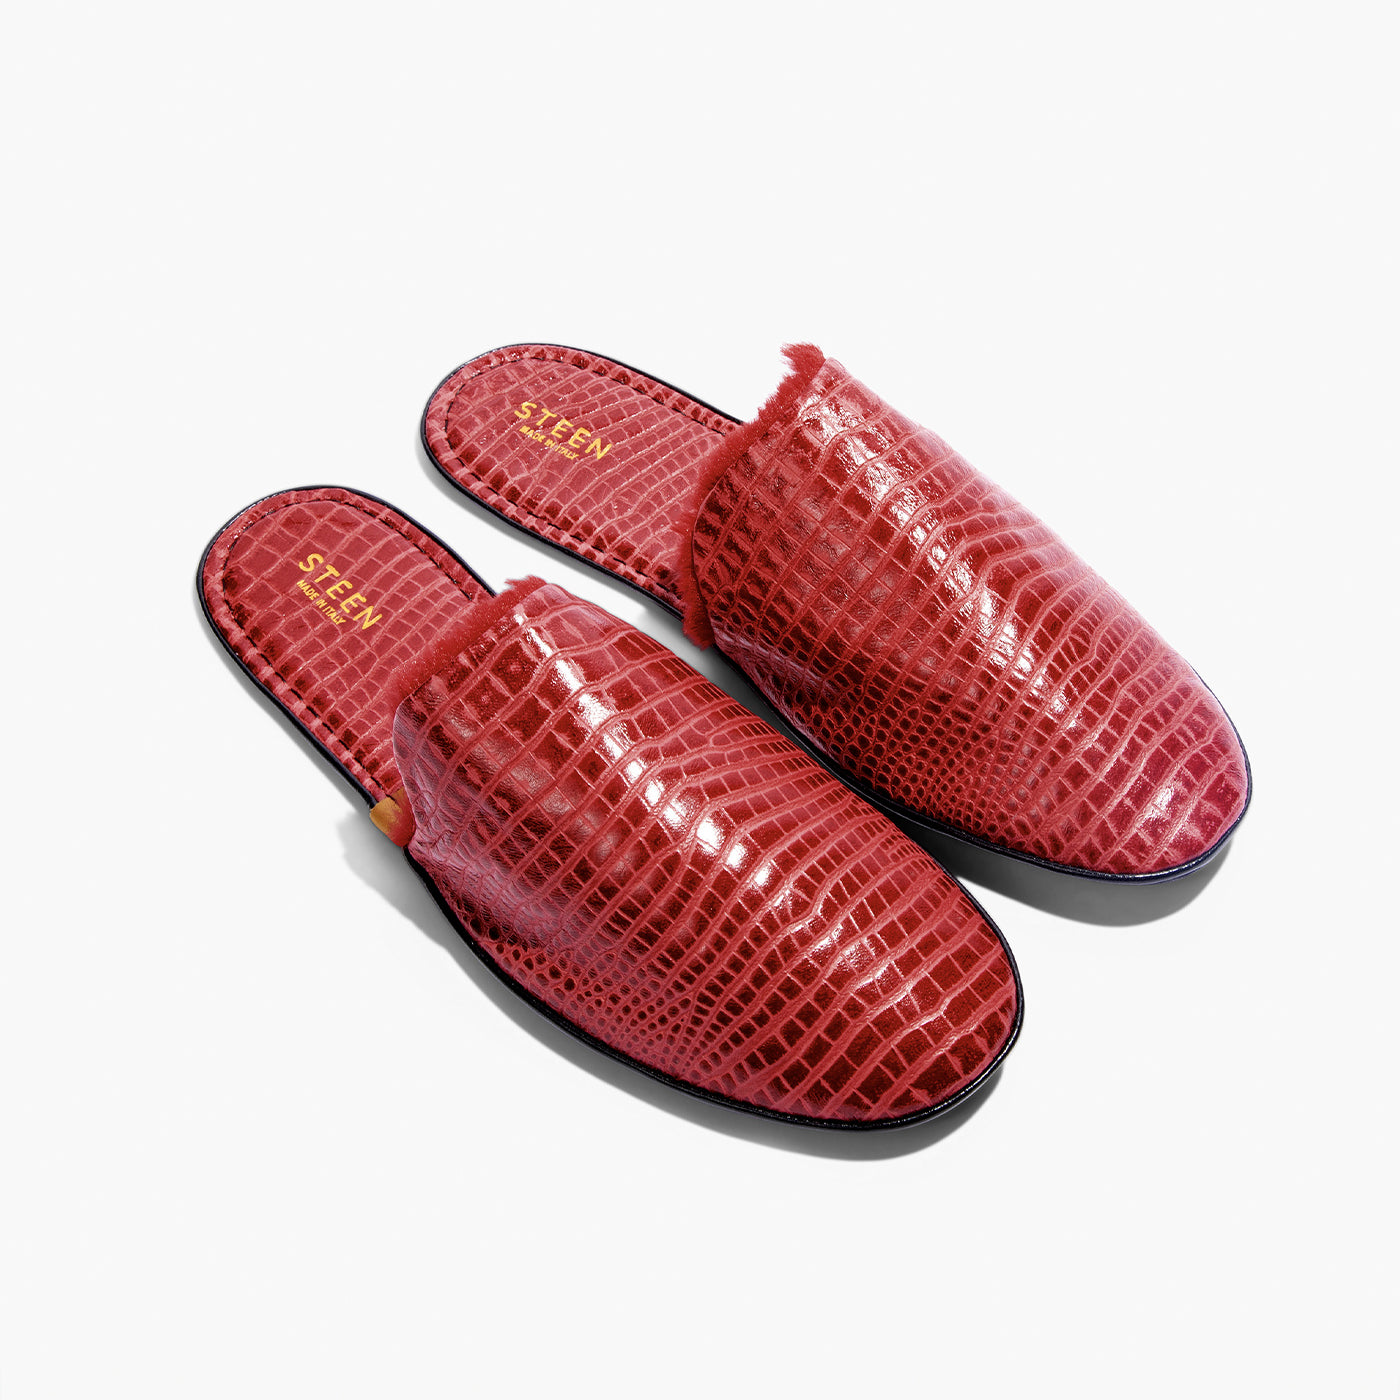 Women’s Crocodile Embossed Leather Foldable Slippers with Eco-Fur